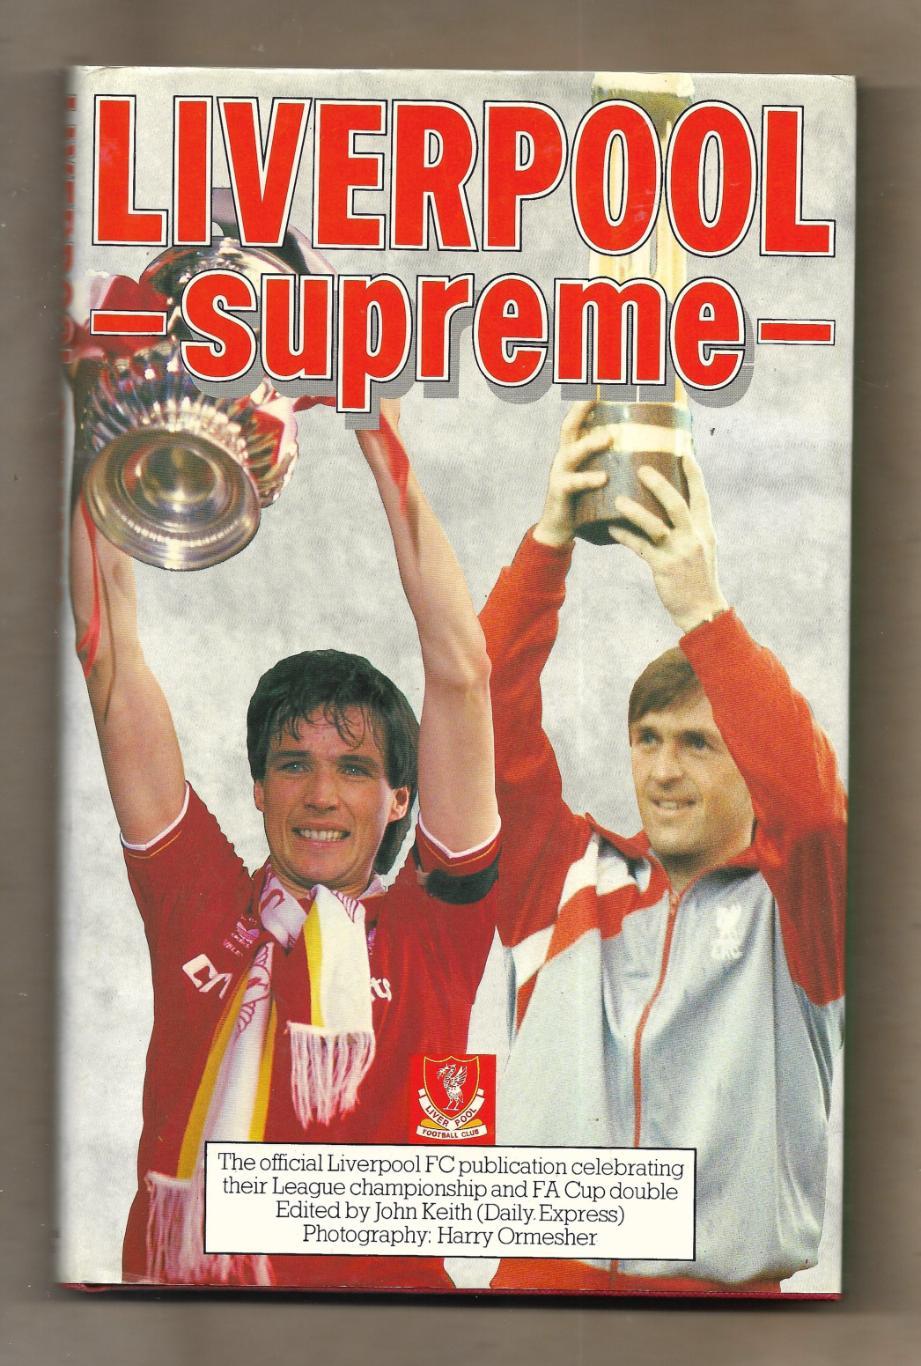 LIVERPOOL - supreme. _1986 _The_official_Liverpool_publication_celebrating ...